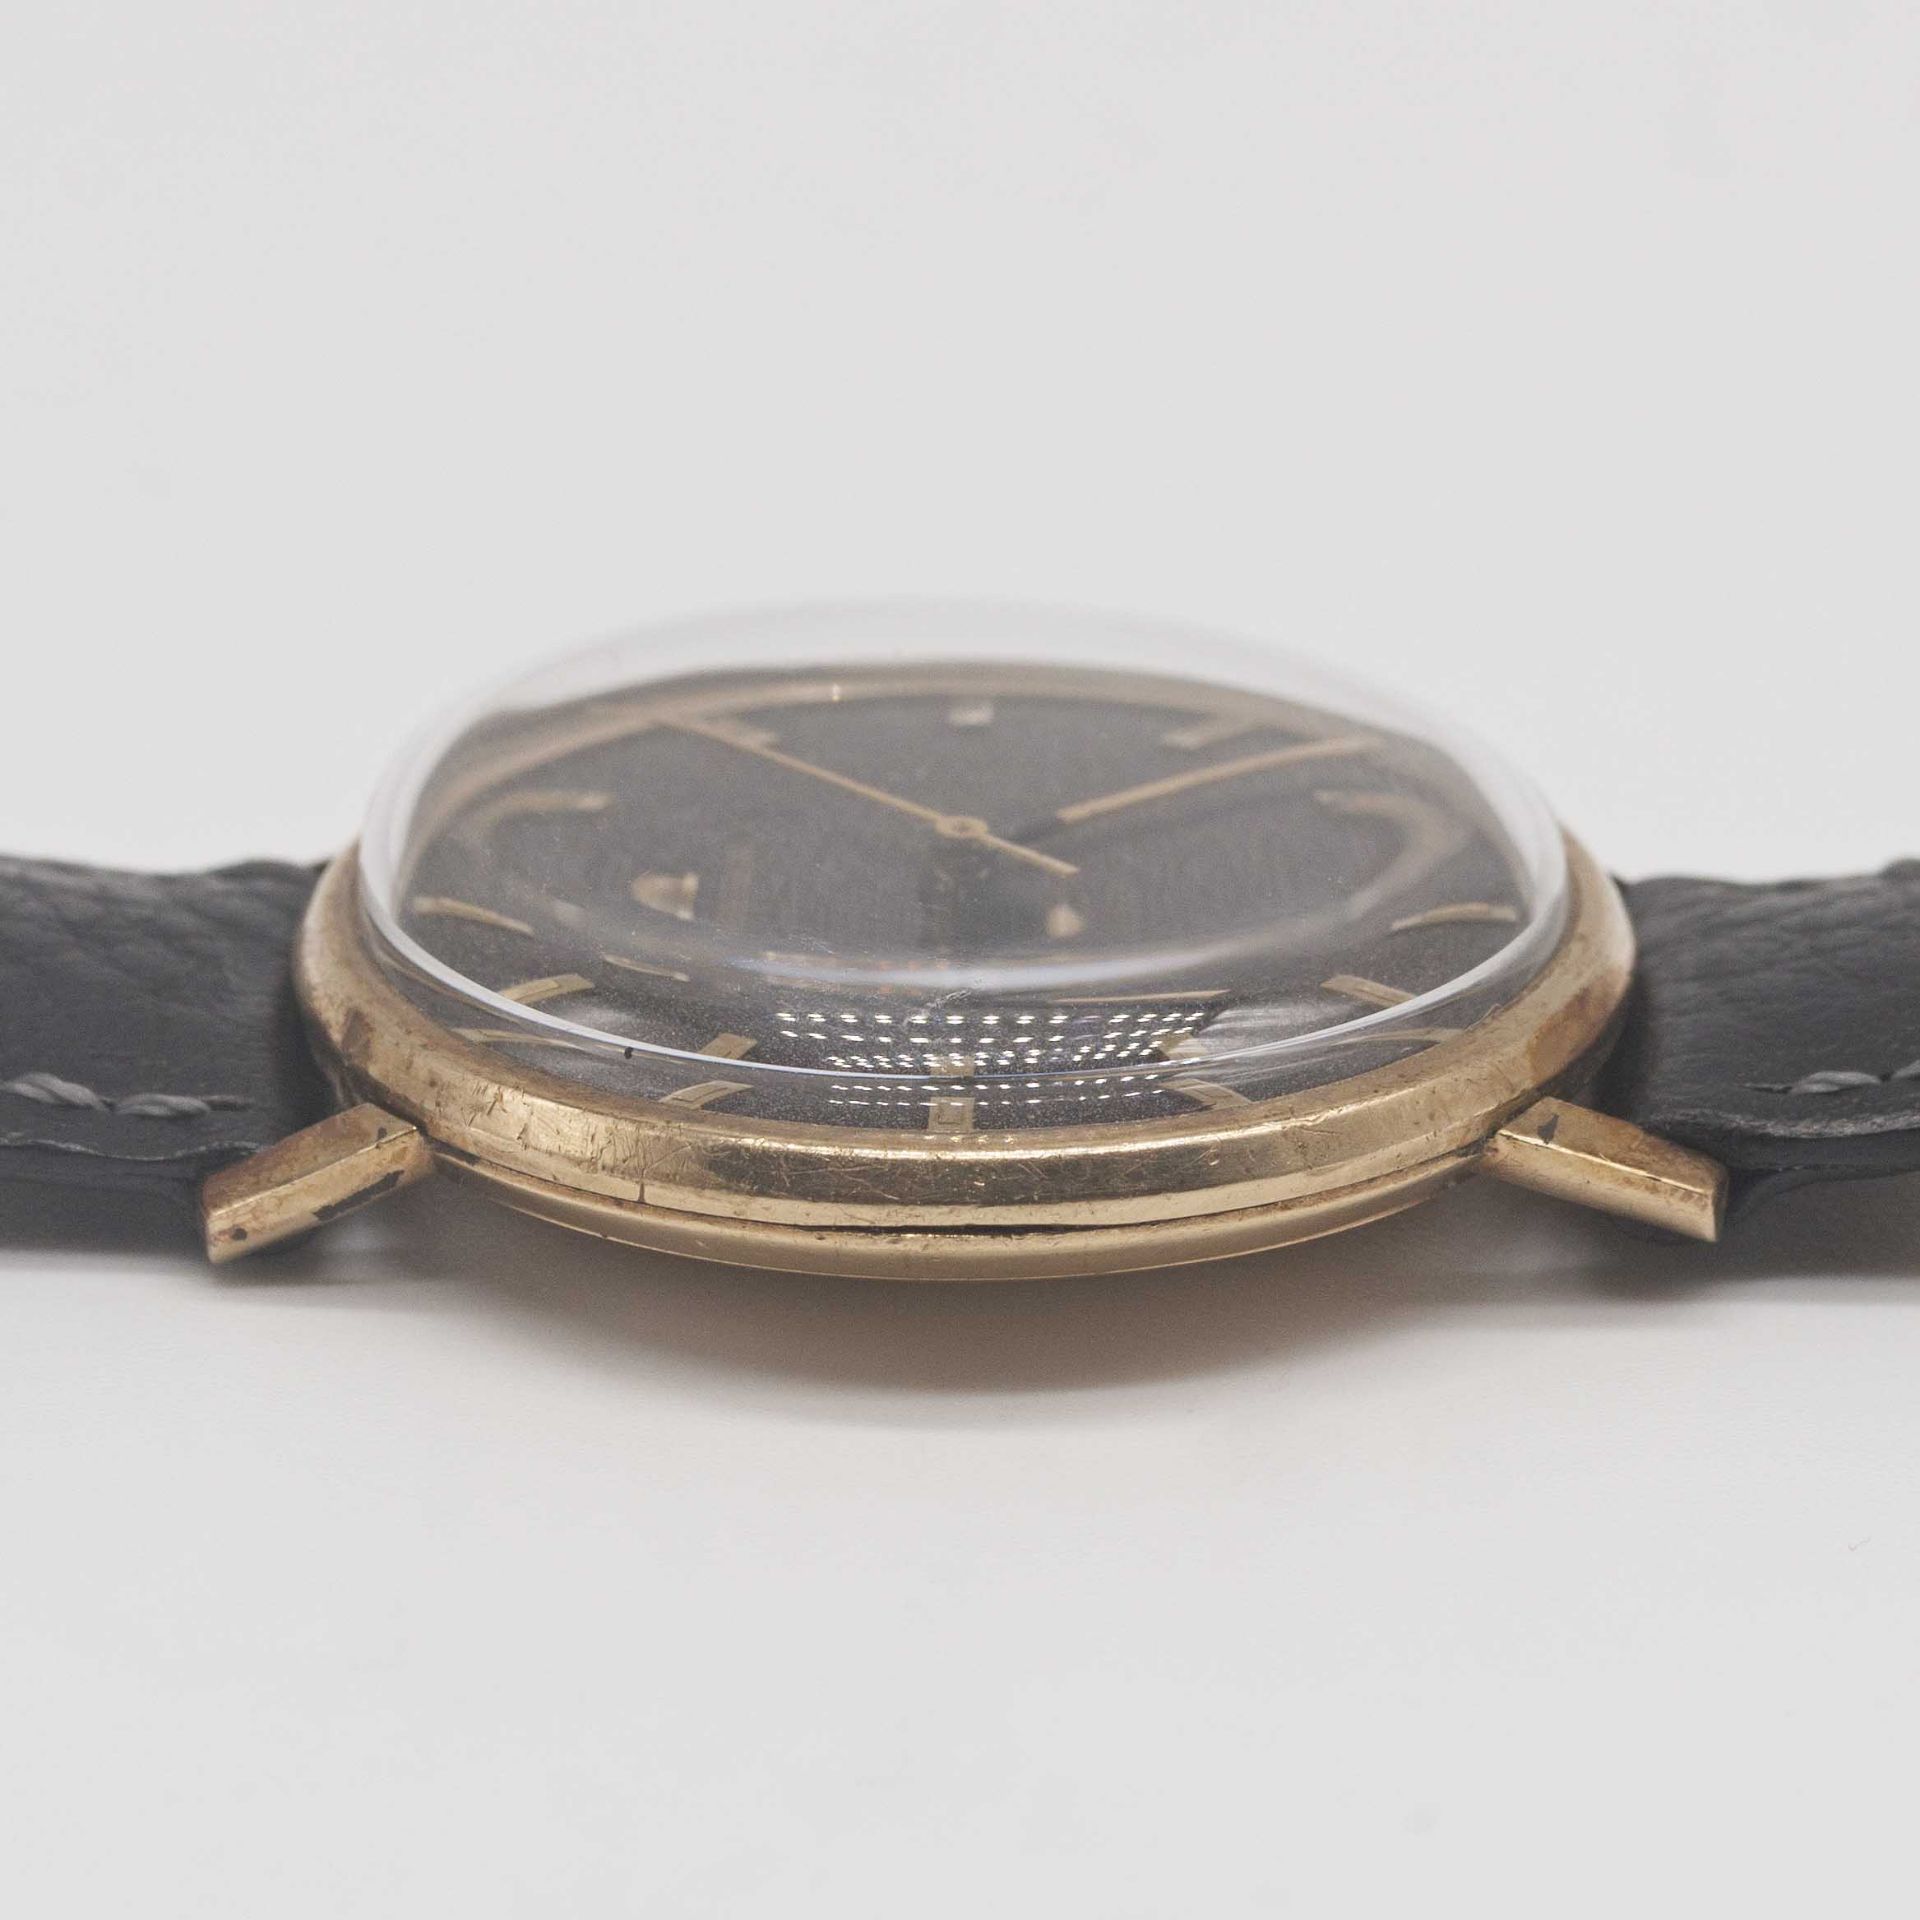 A GENTLEMAN'S 9CT SOLID GOLD OMEGA WRIST WATCH CIRCA 1960s, WITH GREY DIAL Movement: Manual wind, - Image 8 of 8